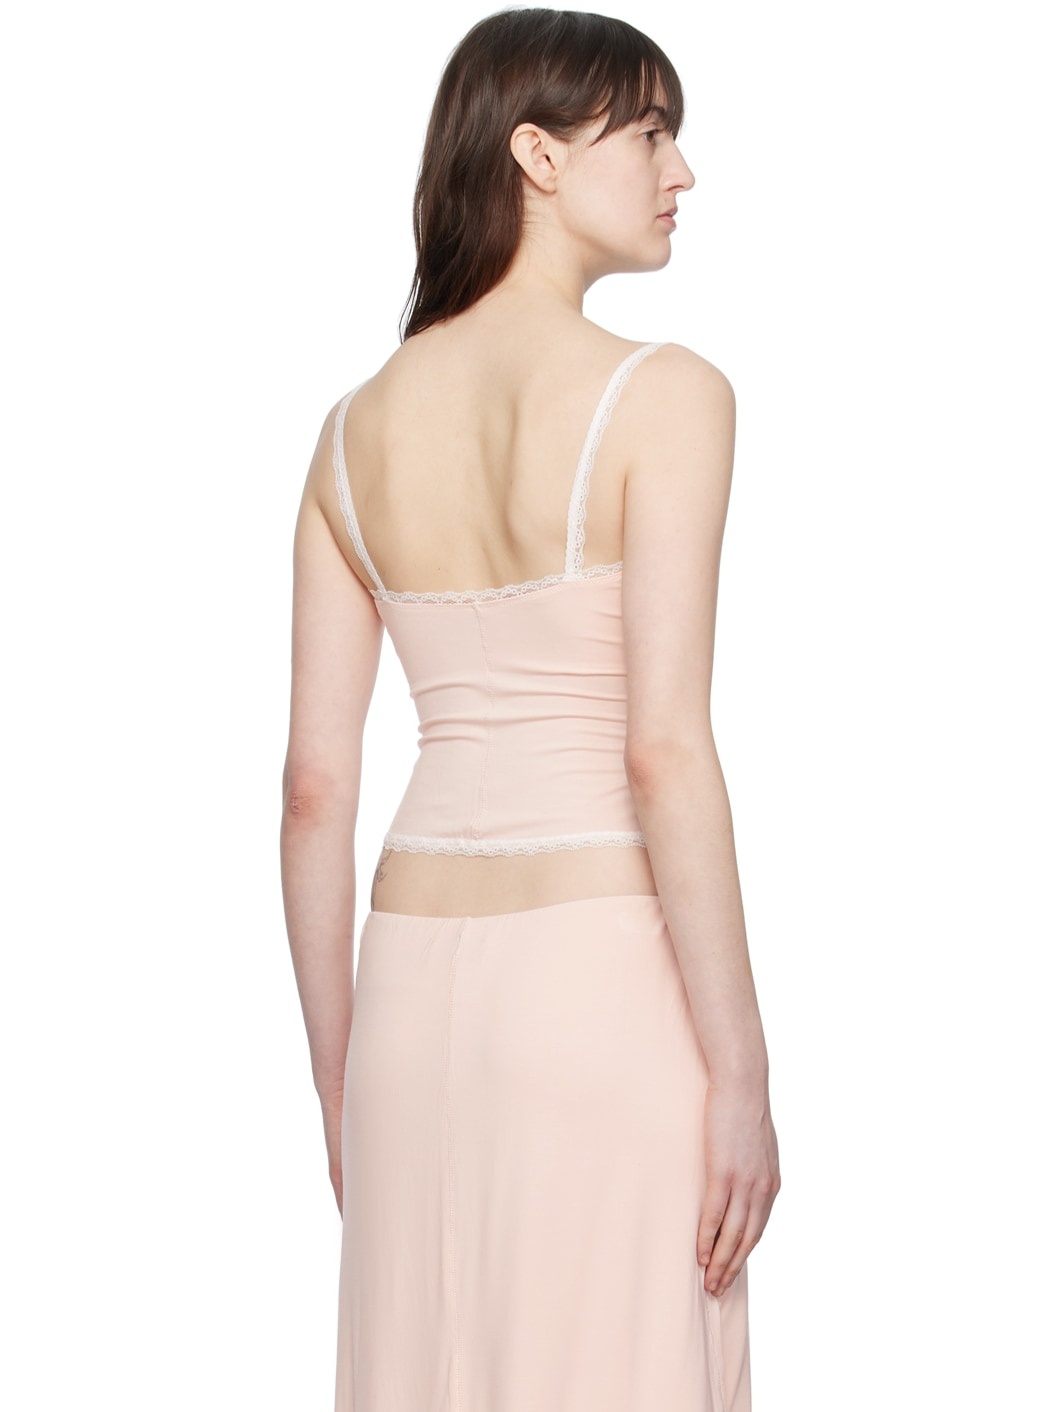 Pink Dainty Camisole - 3